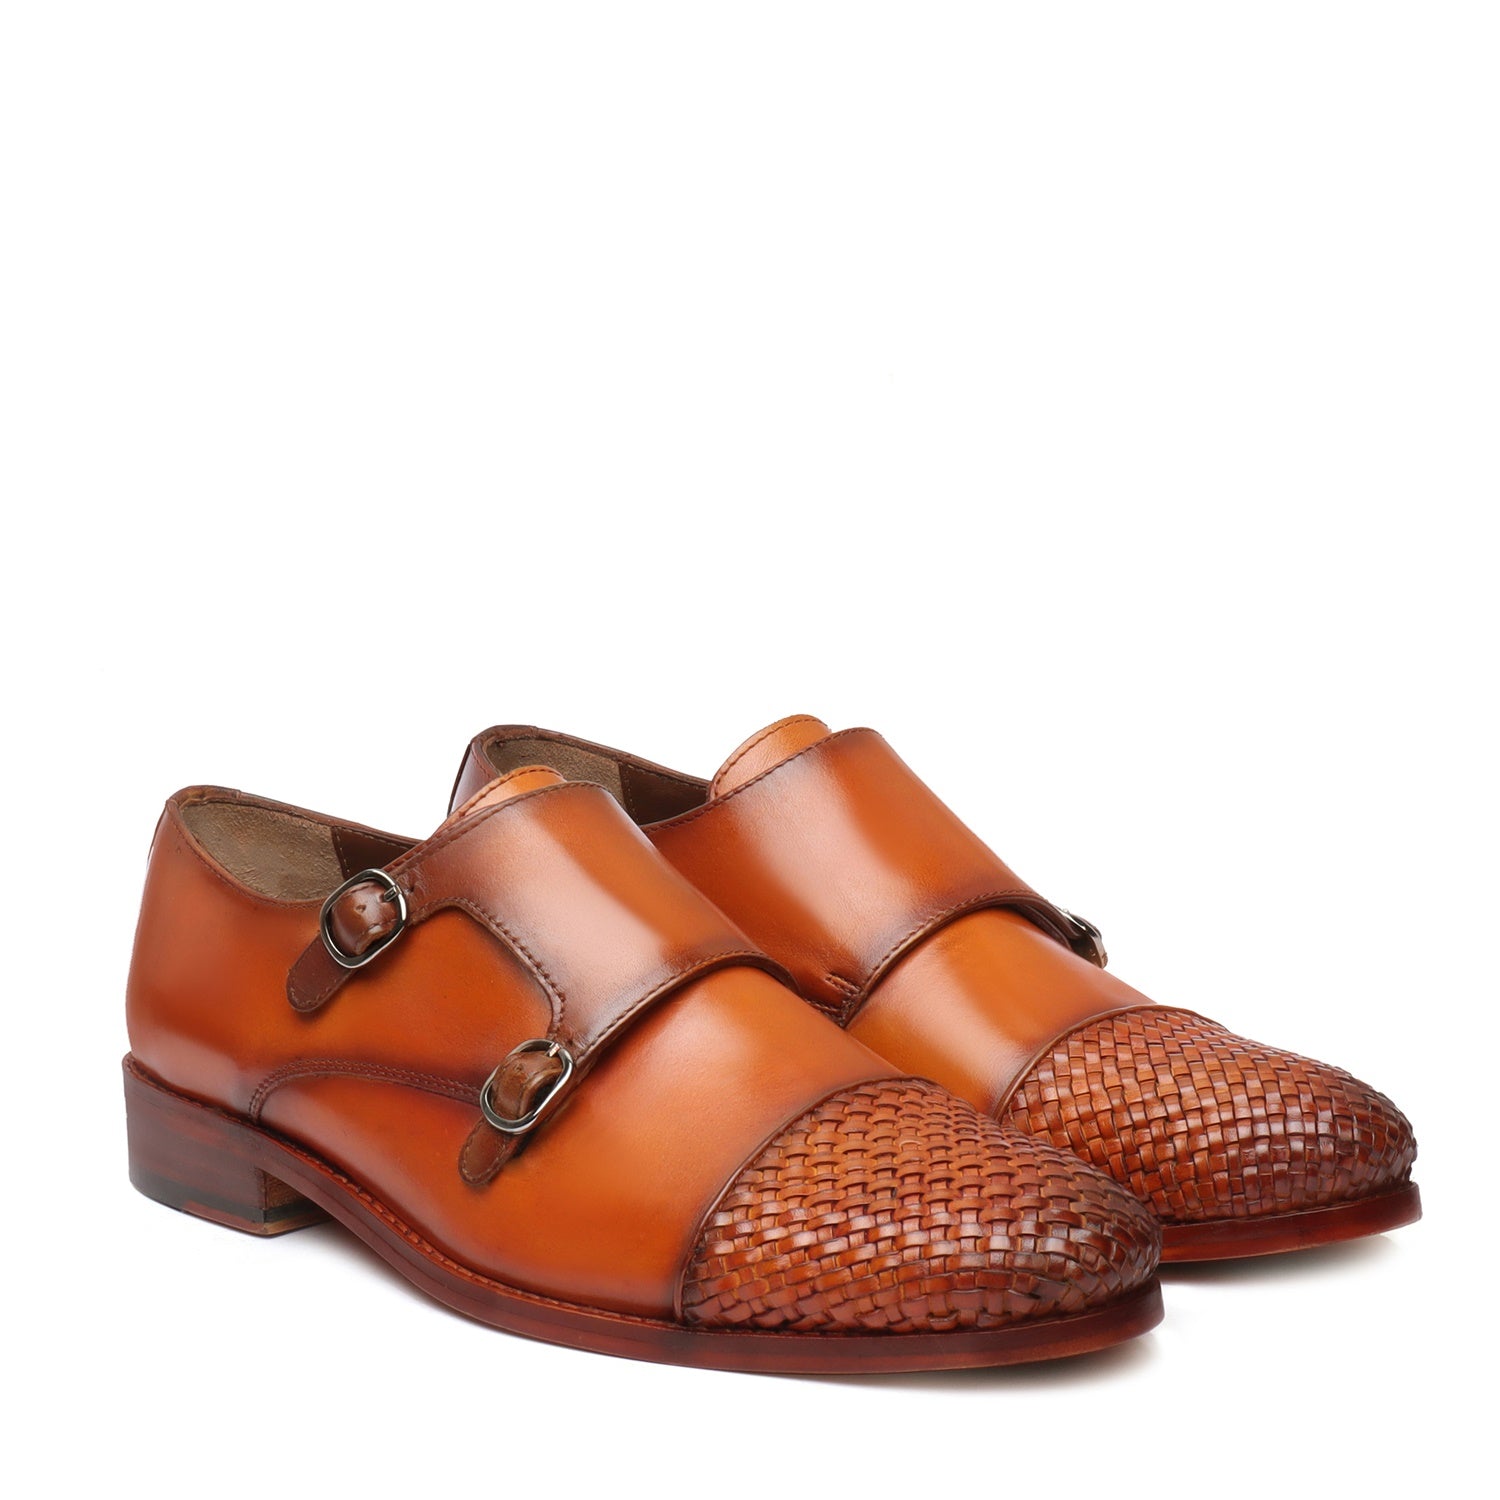 Tan Contrasting Cap Toe Leather Woven Detailed Double Monk With Leather Sole Shoes By Brune & Bareskin